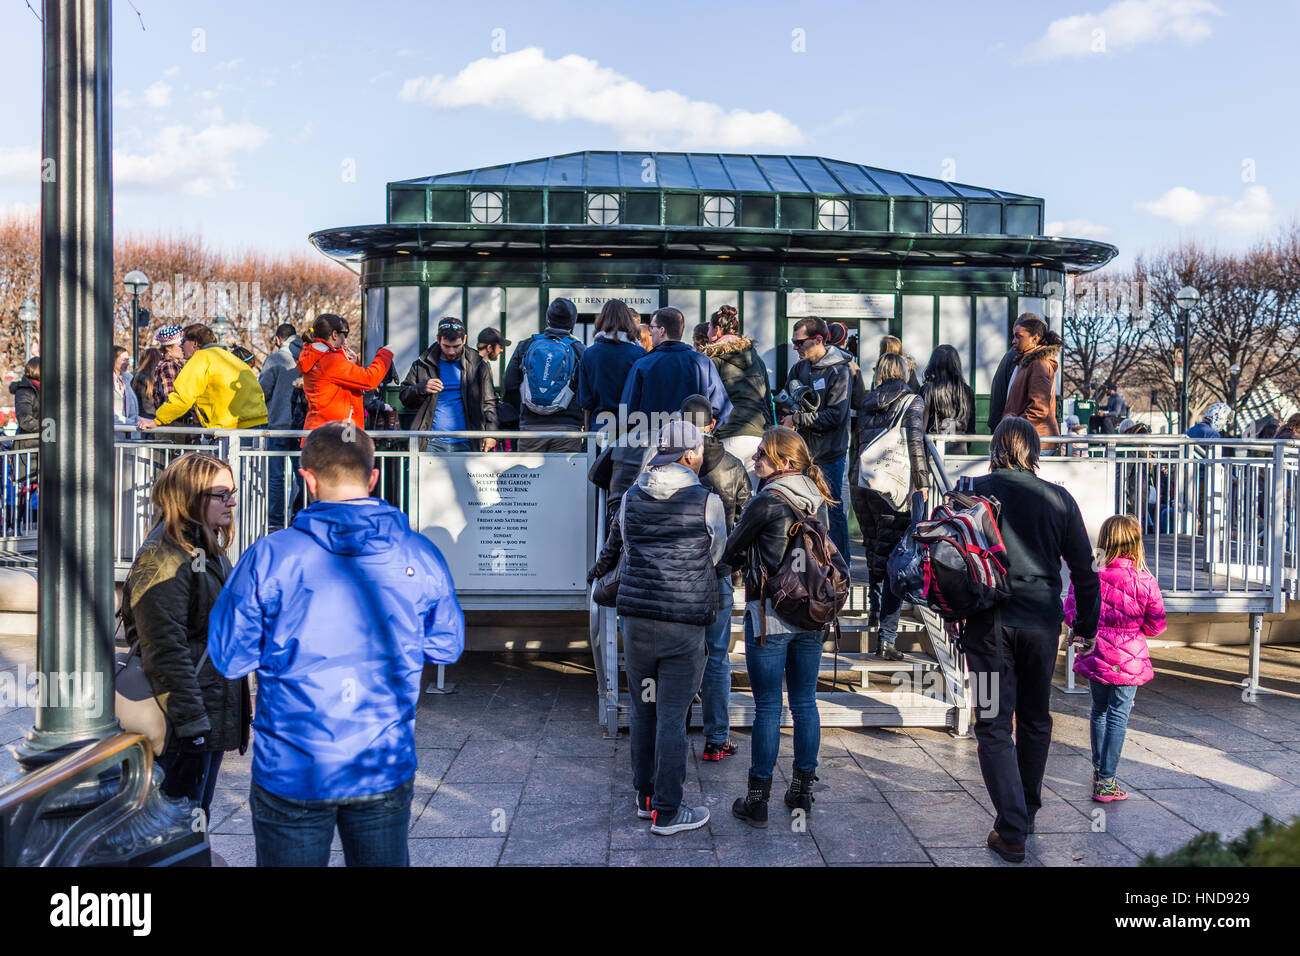 Washington DC, USA - January 28, 2017: People waiting for ice rink to skate in National Gallery of Art Sculpture garden Stock Photo